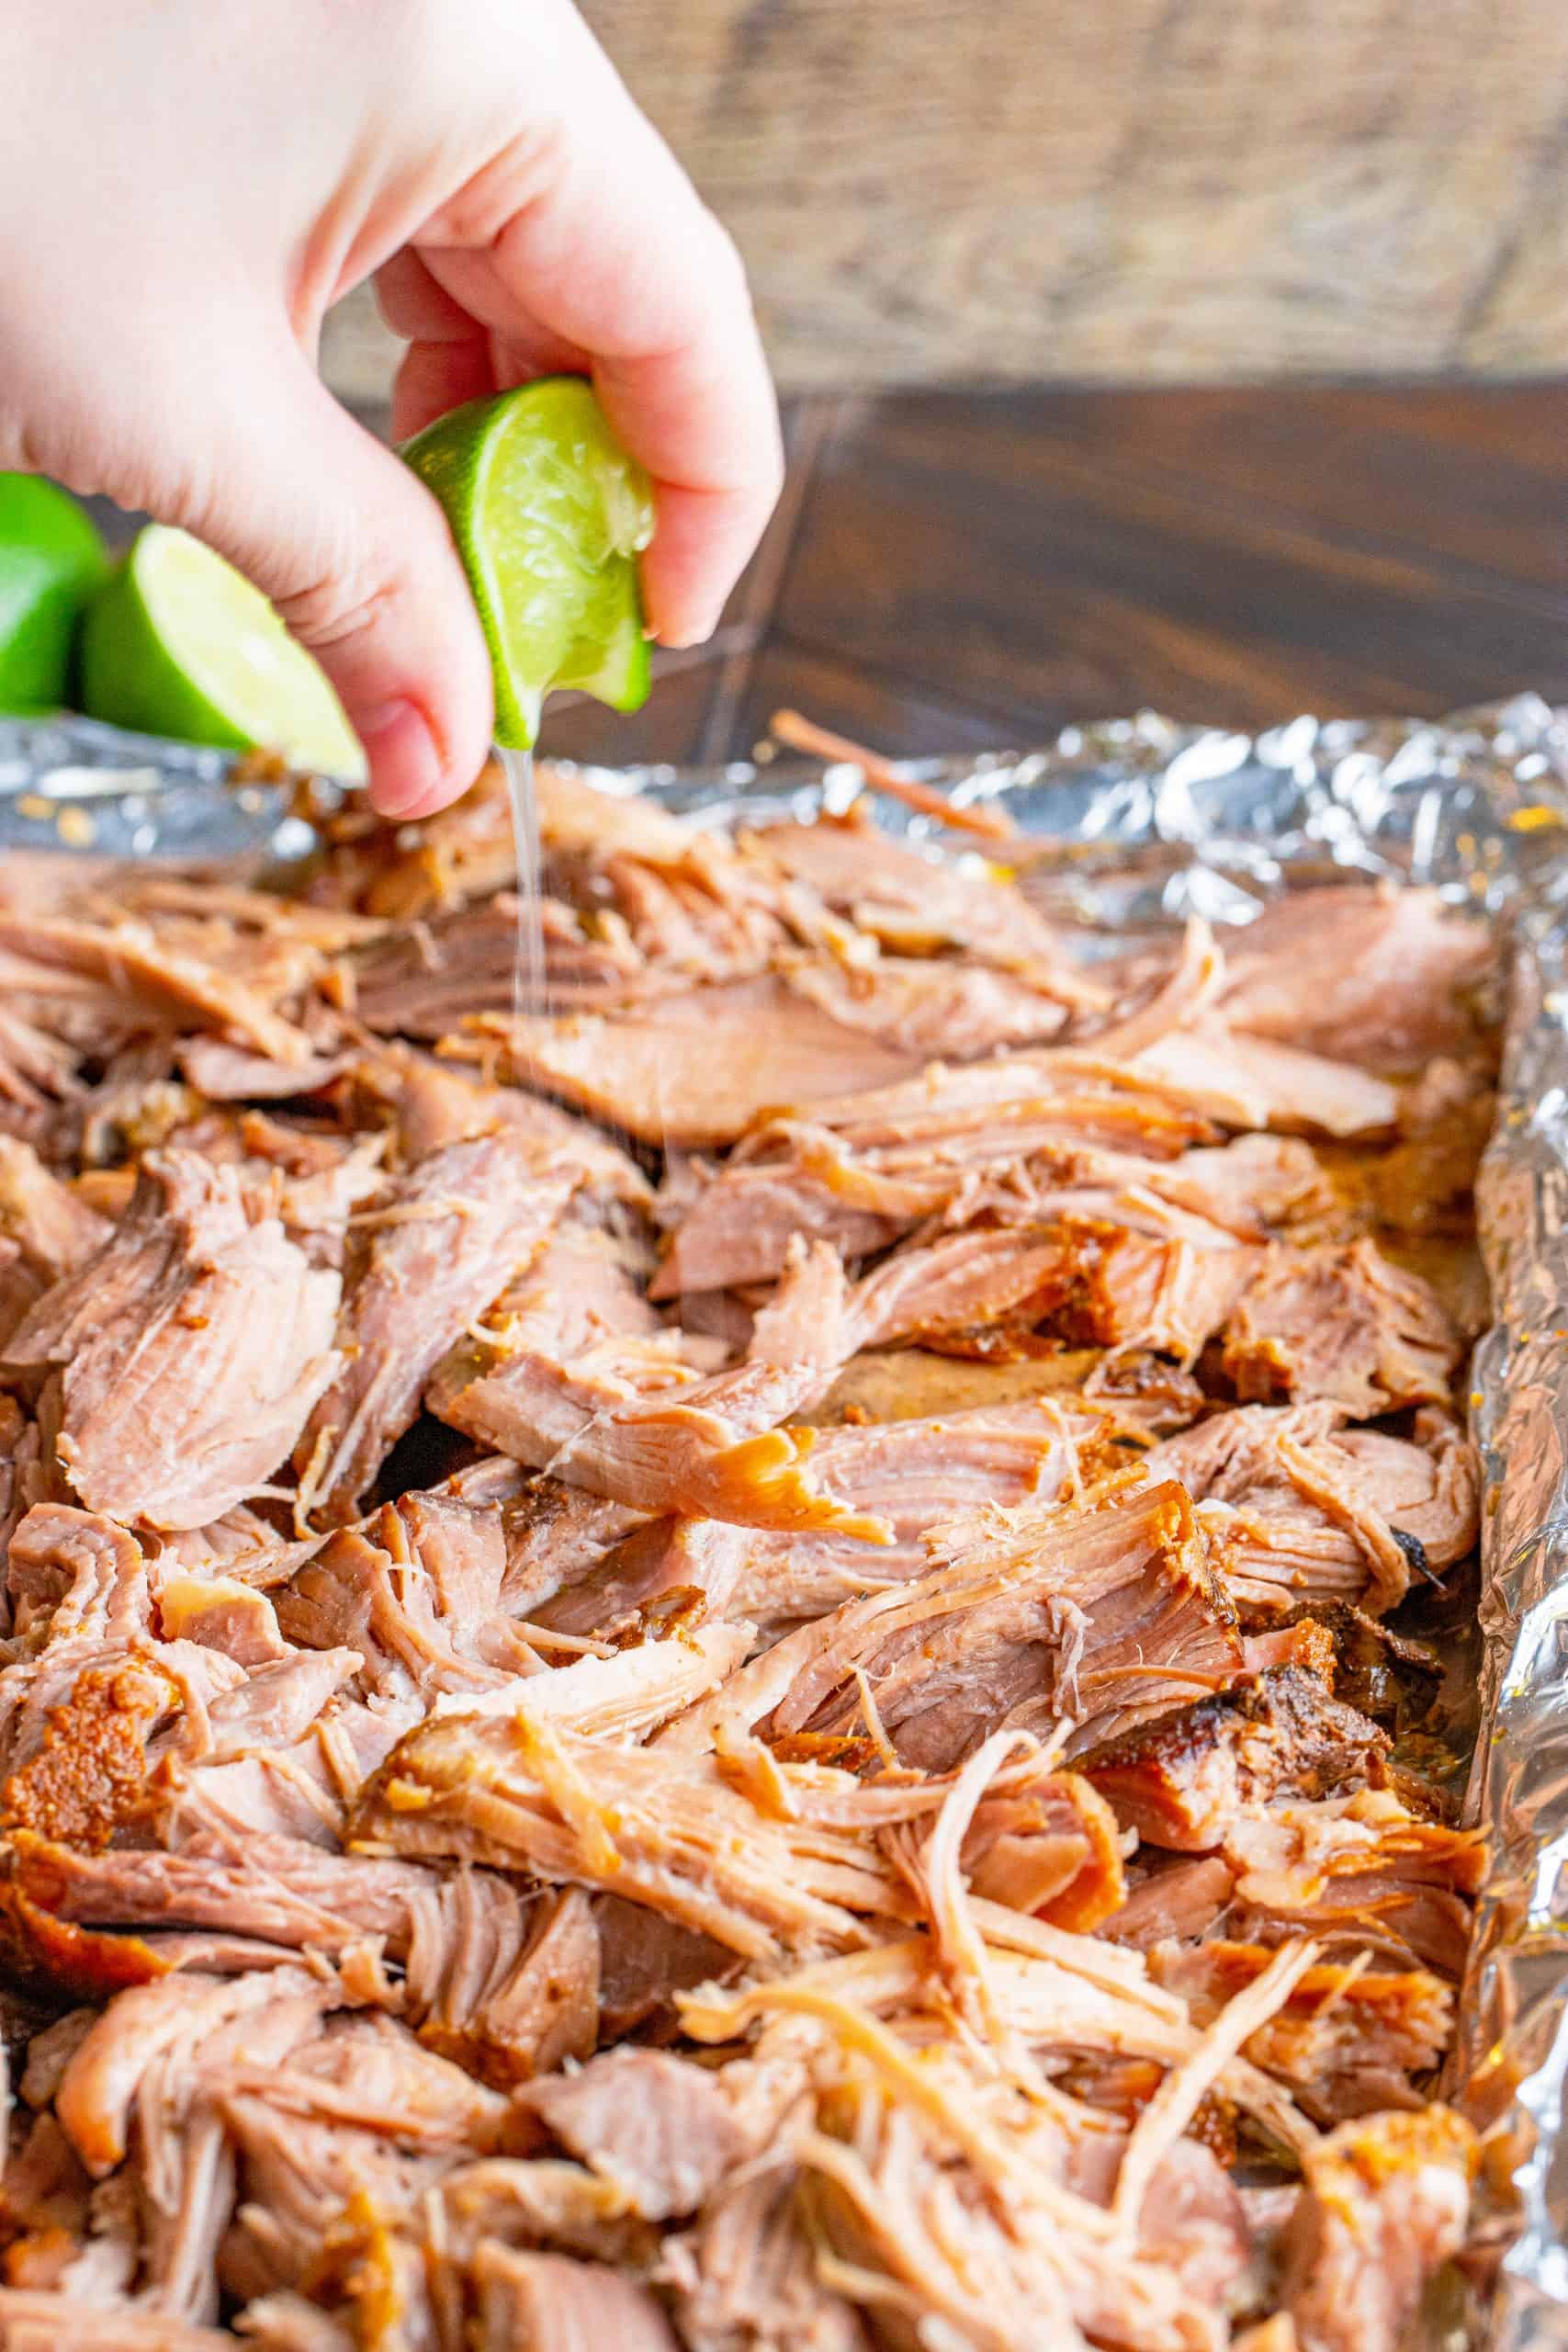 squeezing lime juice on top of shredded pork.